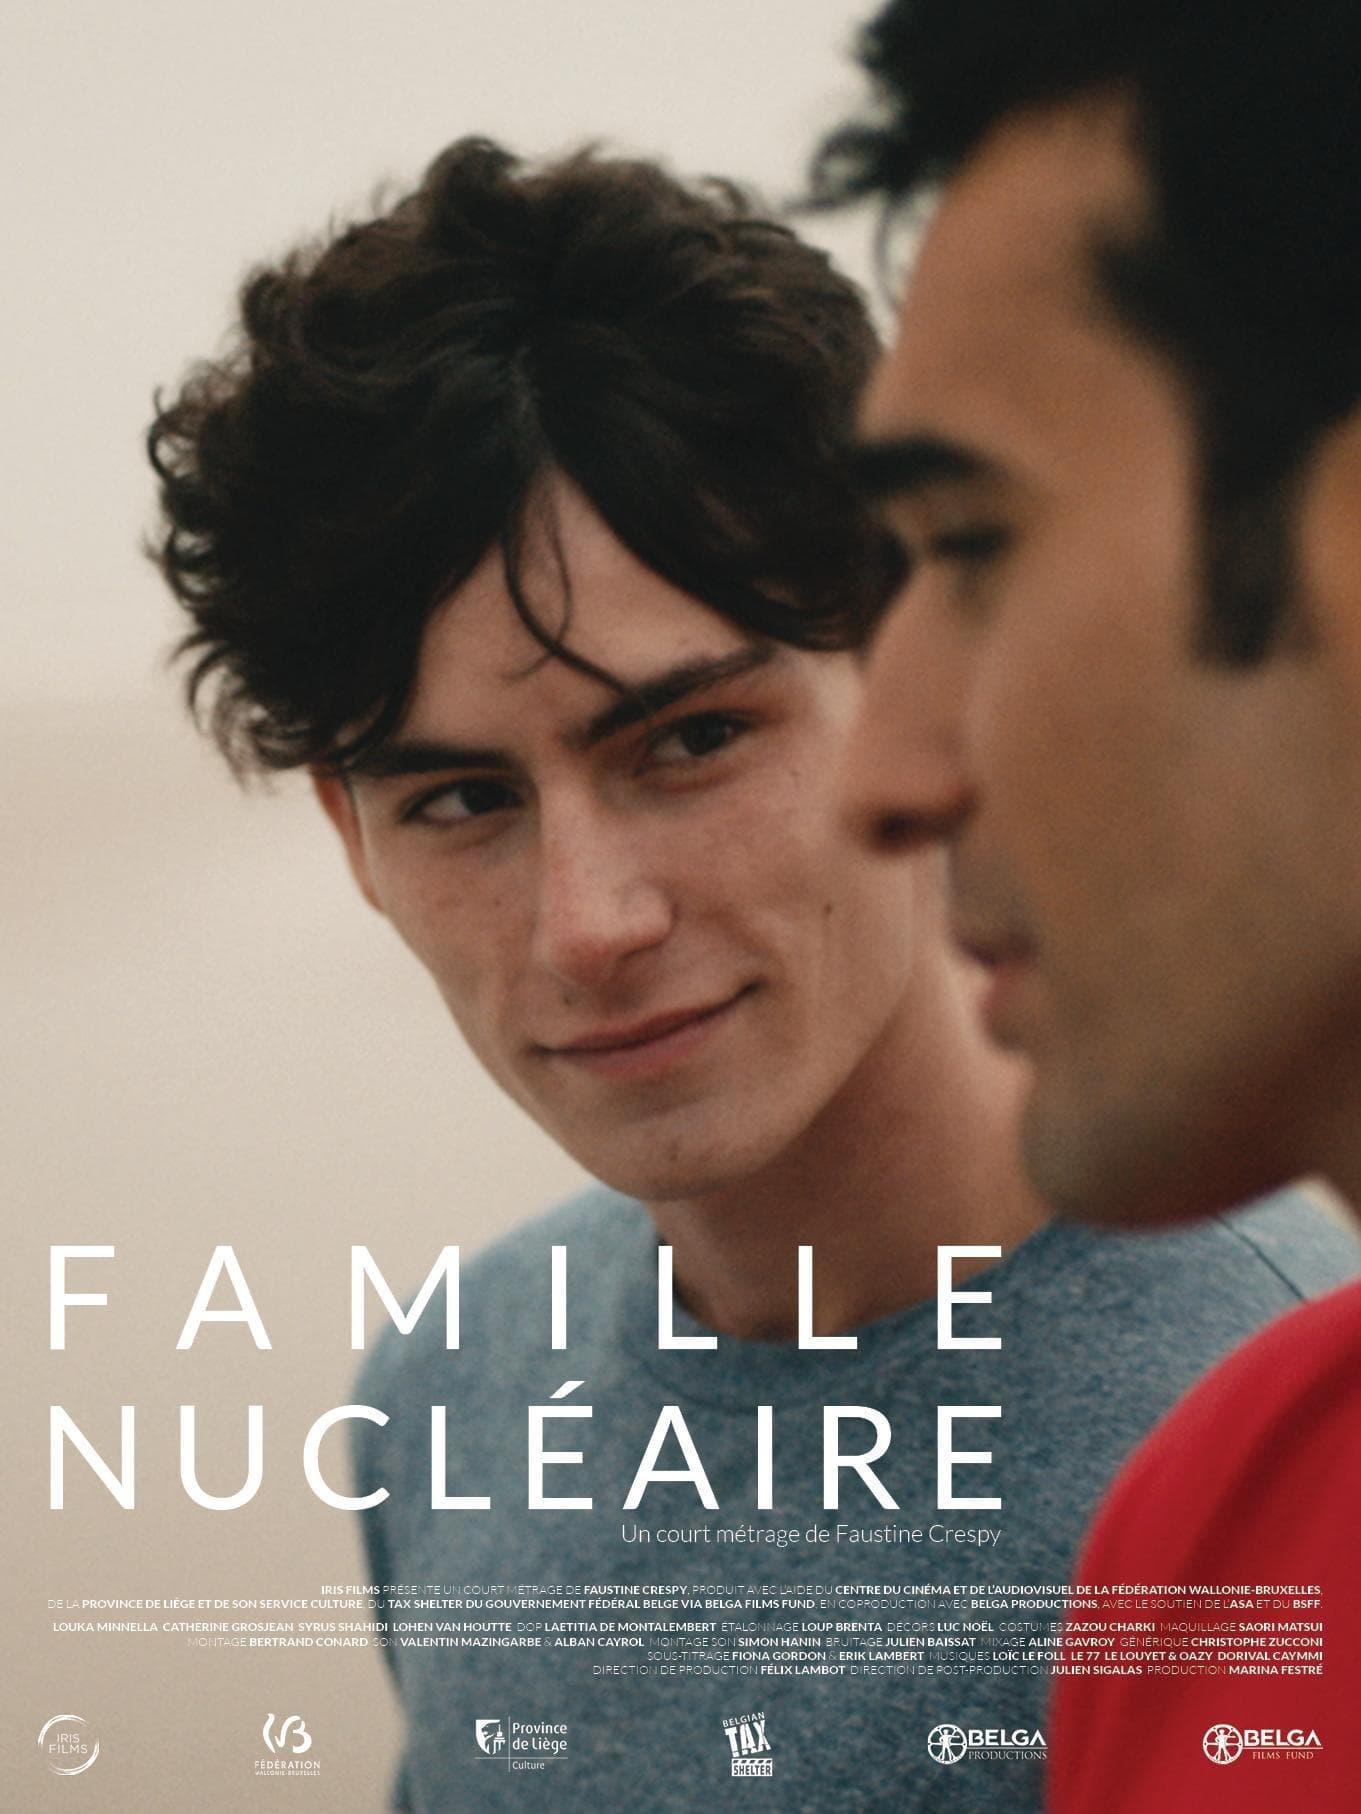 Nuclear Family poster